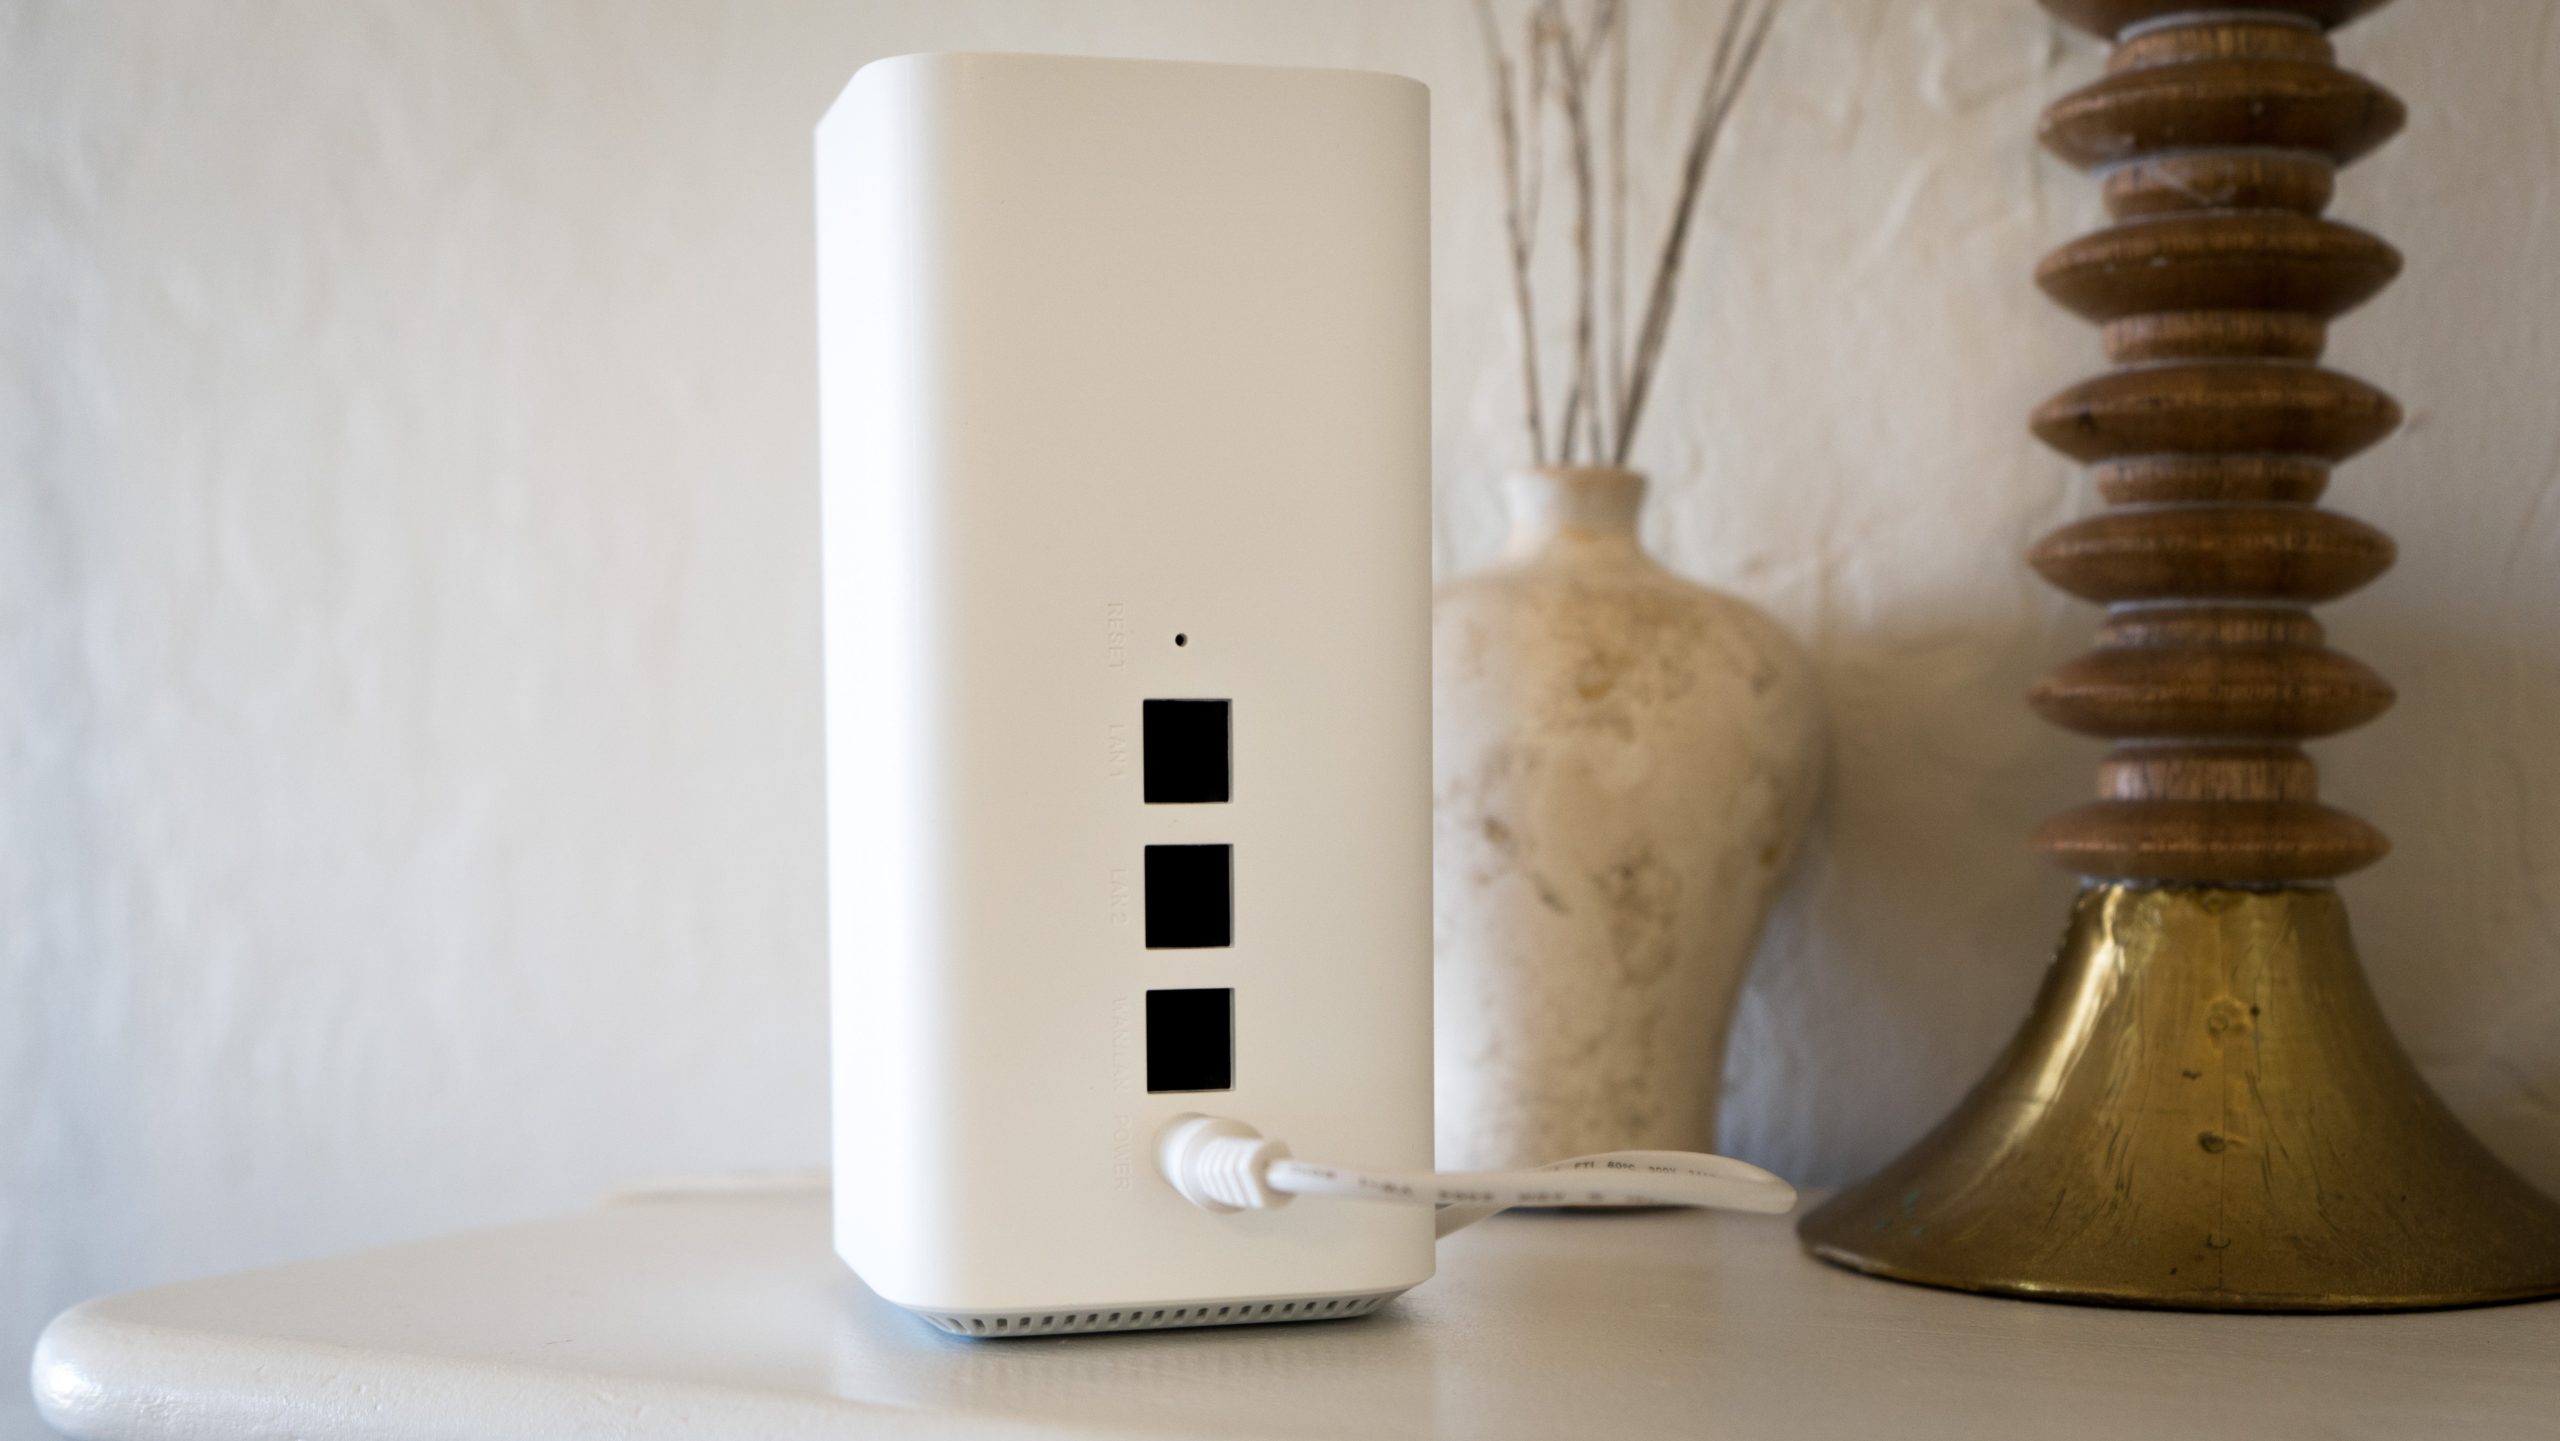 Each of the Vilo mesh nodes has three Ethernet ports, including two for external devices like gaming consoles and printers. (Photo: Florence Ion/Gizmodo)